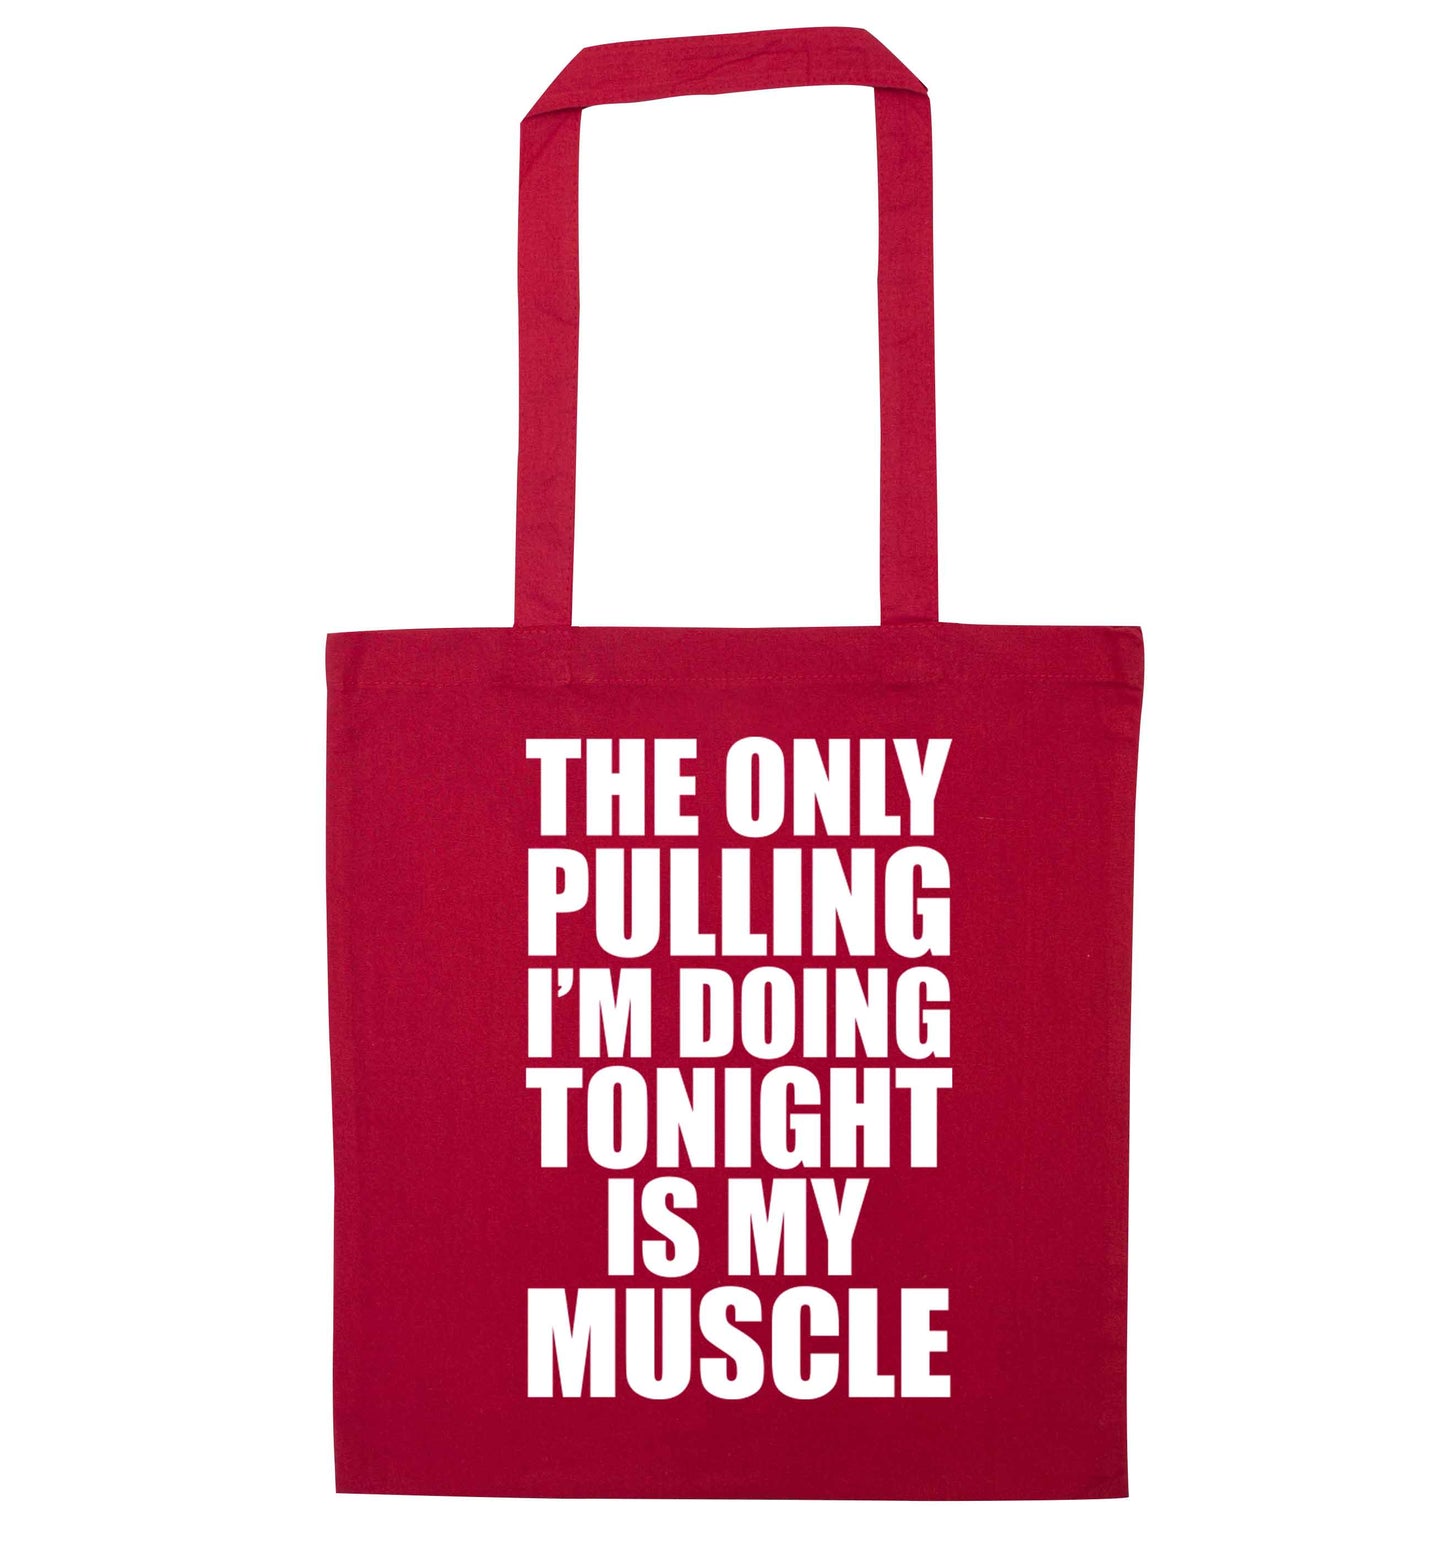 The only pulling I'm doing tonight is my muscle red tote bag